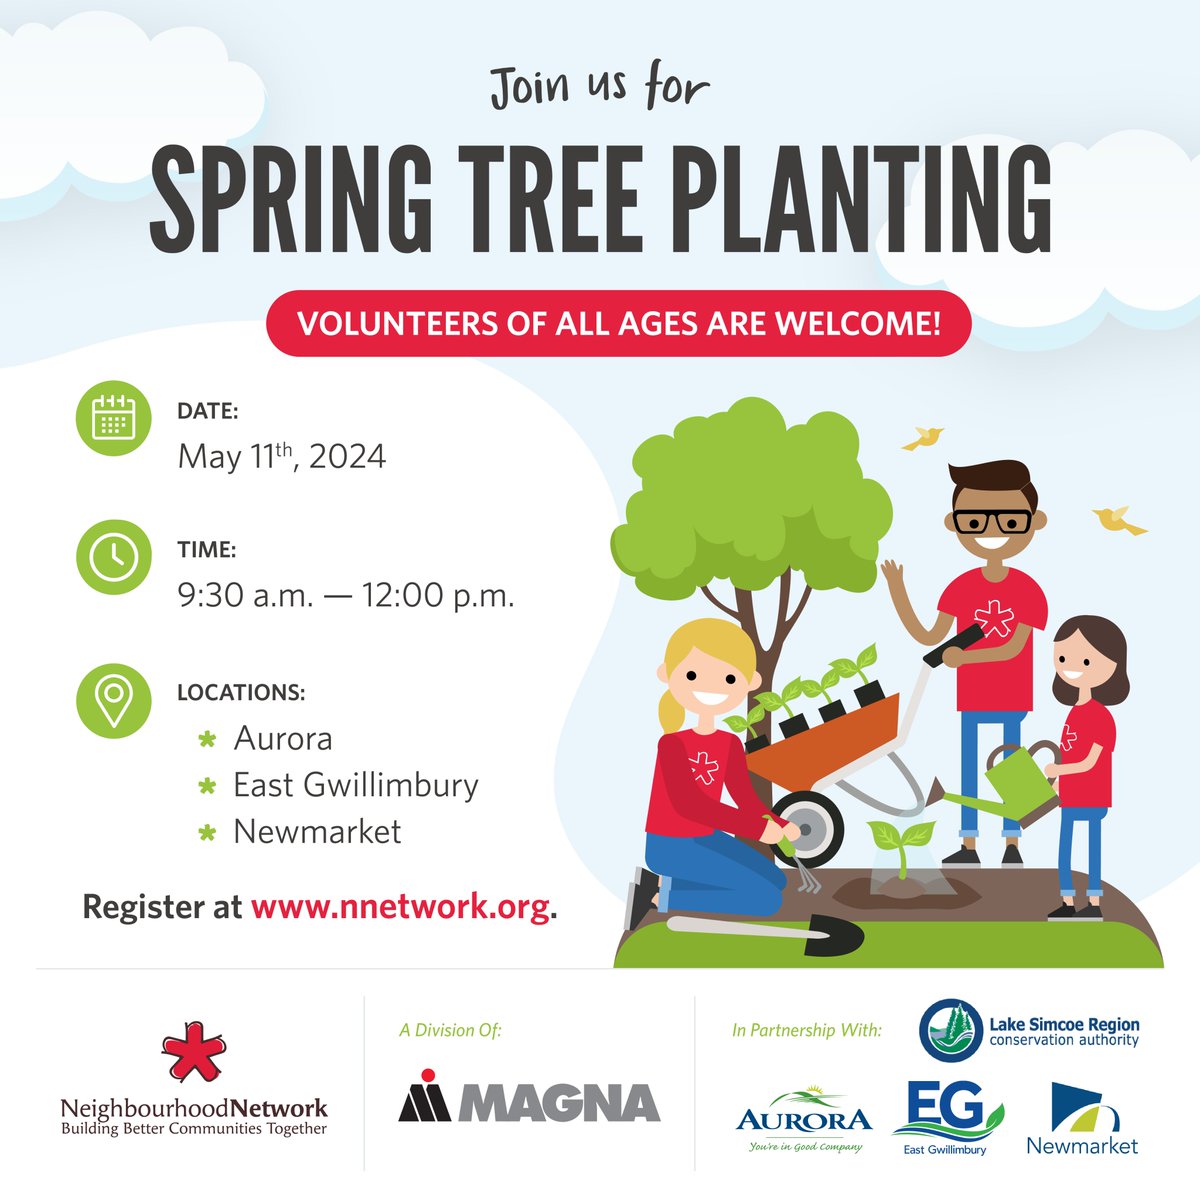 In partnership with @LSRCA, Neighbourhood Network is proud to announce that our annual Spring Tree Planting Day is scheduled for Saturday, May 11th, 2024, from 9:30 a.m. - 12 p.m.! Sign up to volunteer today at neighbourhoodnetwork.org/program/spring…. 🌱 #YorkRegion #Volunteer